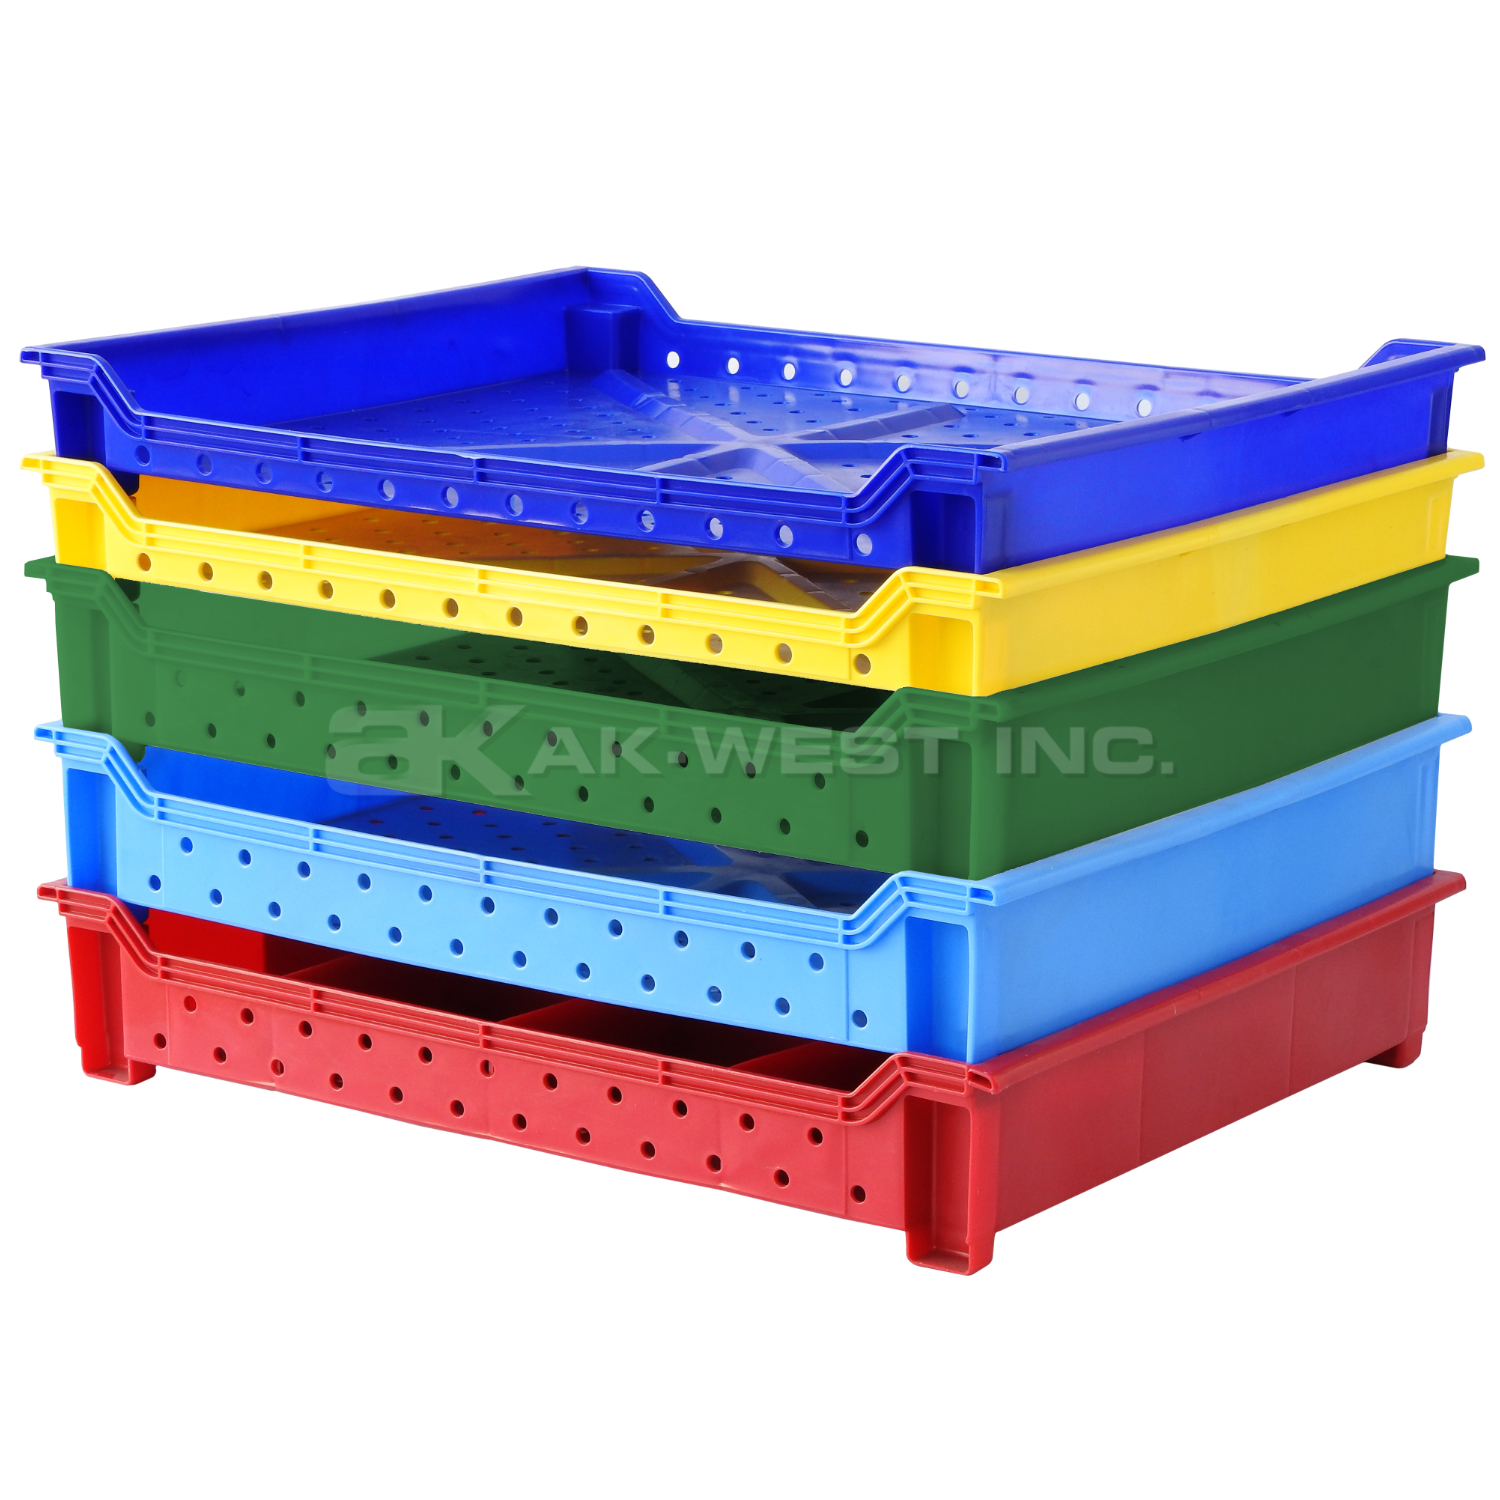 Red, 24"L x 18"W x 4"H Stackable Tray w/ Vented Sides and Base